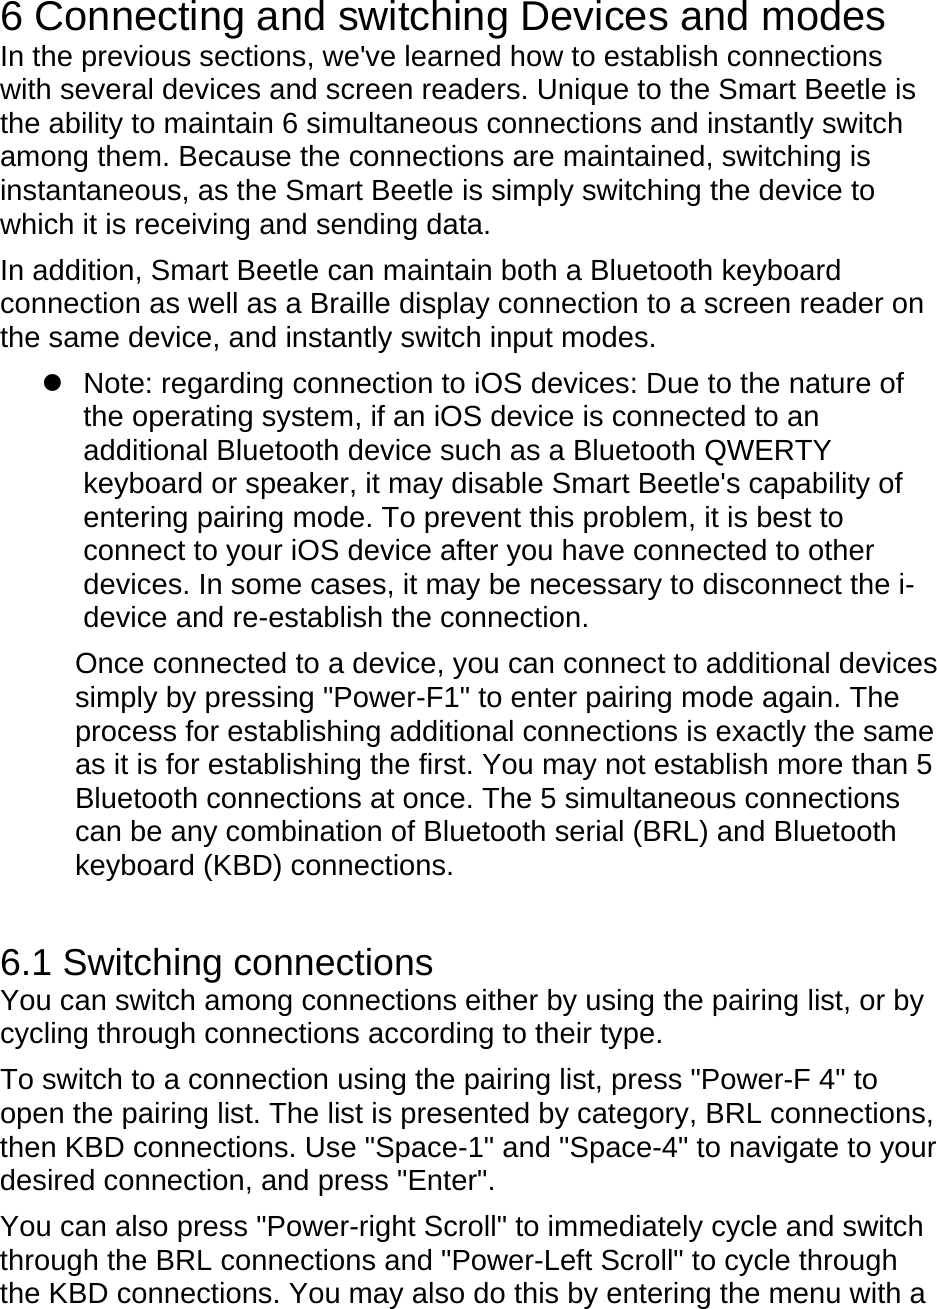  6 Connecting and switching Devices and modes In the previous sections, we&apos;ve learned how to establish connections with several devices and screen readers. Unique to the Smart Beetle is the ability to maintain 6 simultaneous connections and instantly switch among them. Because the connections are maintained, switching is instantaneous, as the Smart Beetle is simply switching the device to which it is receiving and sending data.     In addition, Smart Beetle can maintain both a Bluetooth keyboard connection as well as a Braille display connection to a screen reader on the same device, and instantly switch input modes.     Note: regarding connection to iOS devices: Due to the nature of the operating system, if an iOS device is connected to an additional Bluetooth device such as a Bluetooth QWERTY keyboard or speaker, it may disable Smart Beetle&apos;s capability of entering pairing mode. To prevent this problem, it is best to connect to your iOS device after you have connected to other devices. In some cases, it may be necessary to disconnect the i-device and re-establish the connection.    Once connected to a device, you can connect to additional devices simply by pressing &quot;Power-F1&quot; to enter pairing mode again. The process for establishing additional connections is exactly the same as it is for establishing the first. You may not establish more than 5 Bluetooth connections at once. The 5 simultaneous connections can be any combination of Bluetooth serial (BRL) and Bluetooth keyboard (KBD) connections.  6.1 Switching connections You can switch among connections either by using the pairing list, or by cycling through connections according to their type. To switch to a connection using the pairing list, press &quot;Power-F 4&quot; to open the pairing list. The list is presented by category, BRL connections, then KBD connections. Use &quot;Space-1&quot; and &quot;Space-4&quot; to navigate to your desired connection, and press &quot;Enter&quot;.     You can also press &quot;Power-right Scroll&quot; to immediately cycle and switch through the BRL connections and &quot;Power-Left Scroll&quot; to cycle through the KBD connections. You may also do this by entering the menu with a 